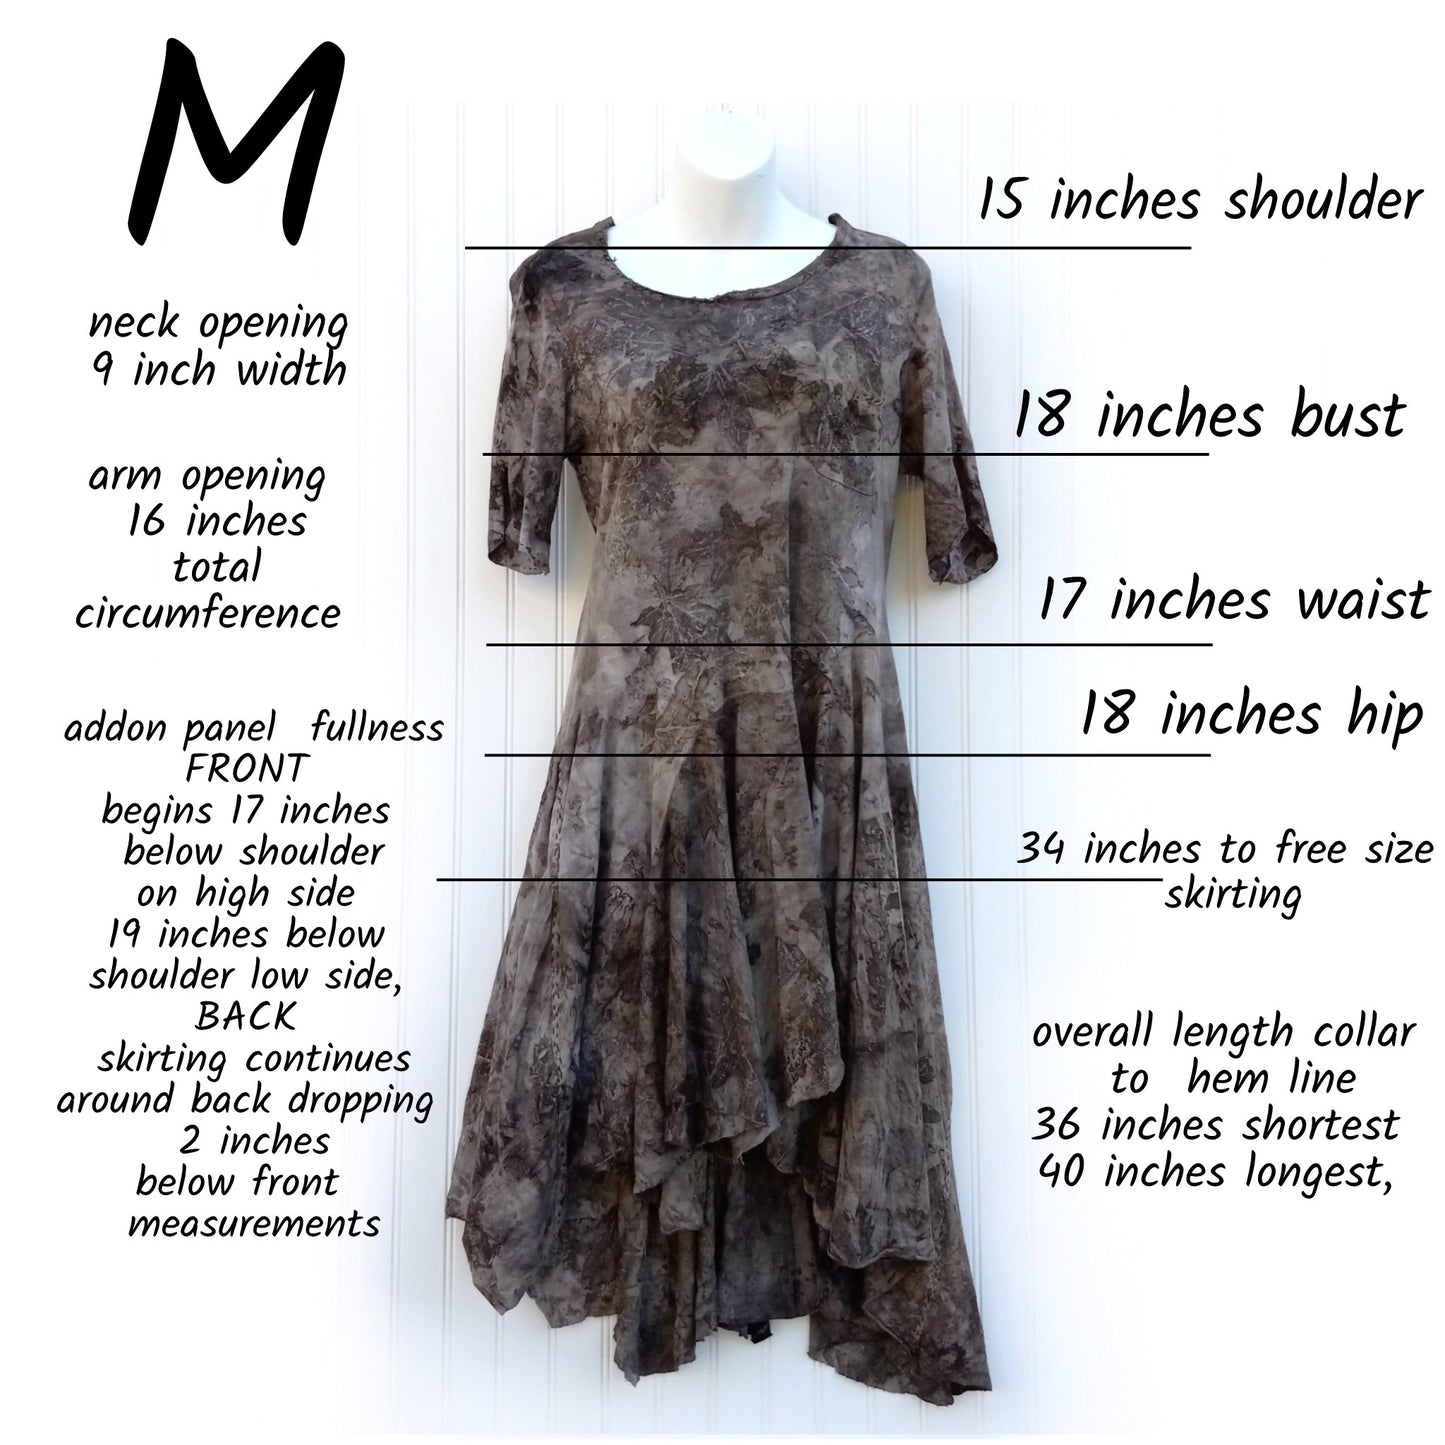 size chart over dress image EARTH M Midi length Dress 3/4 Sleeve Pieced Skirting Hand Stitch Details Eco Refashion Upcycled